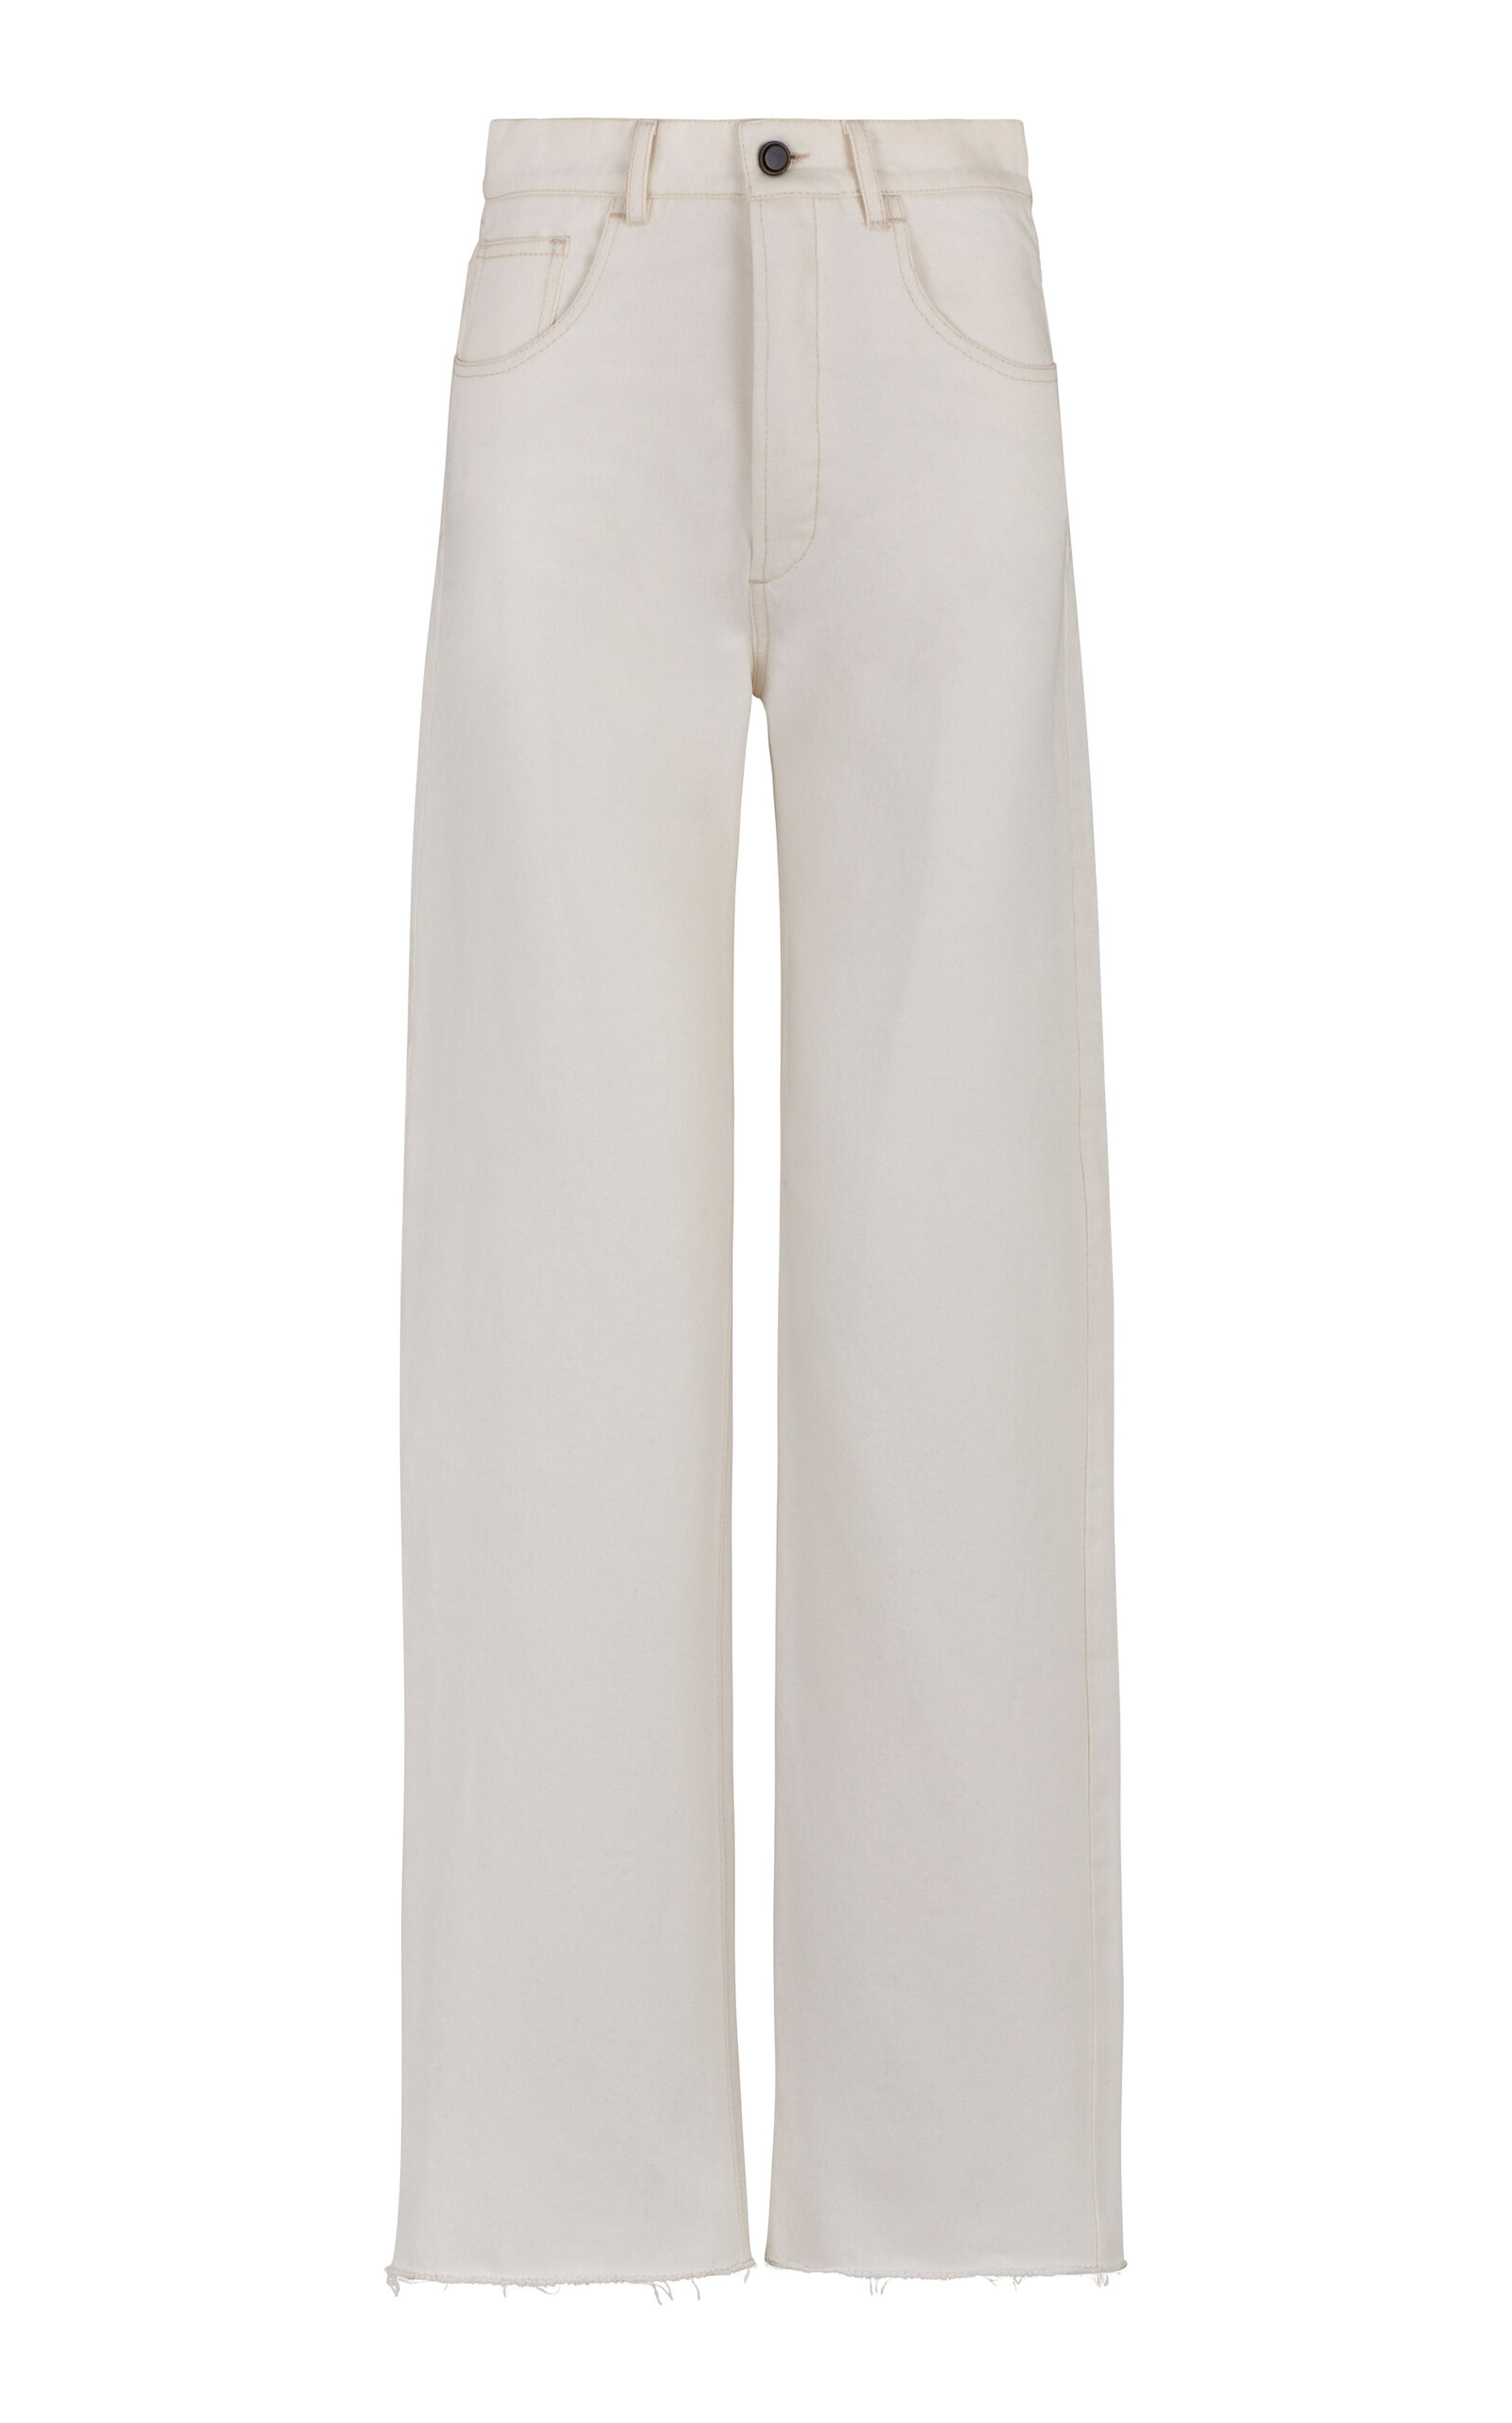 The Dylan High-Rise Rigid Wide-Leg Jeans